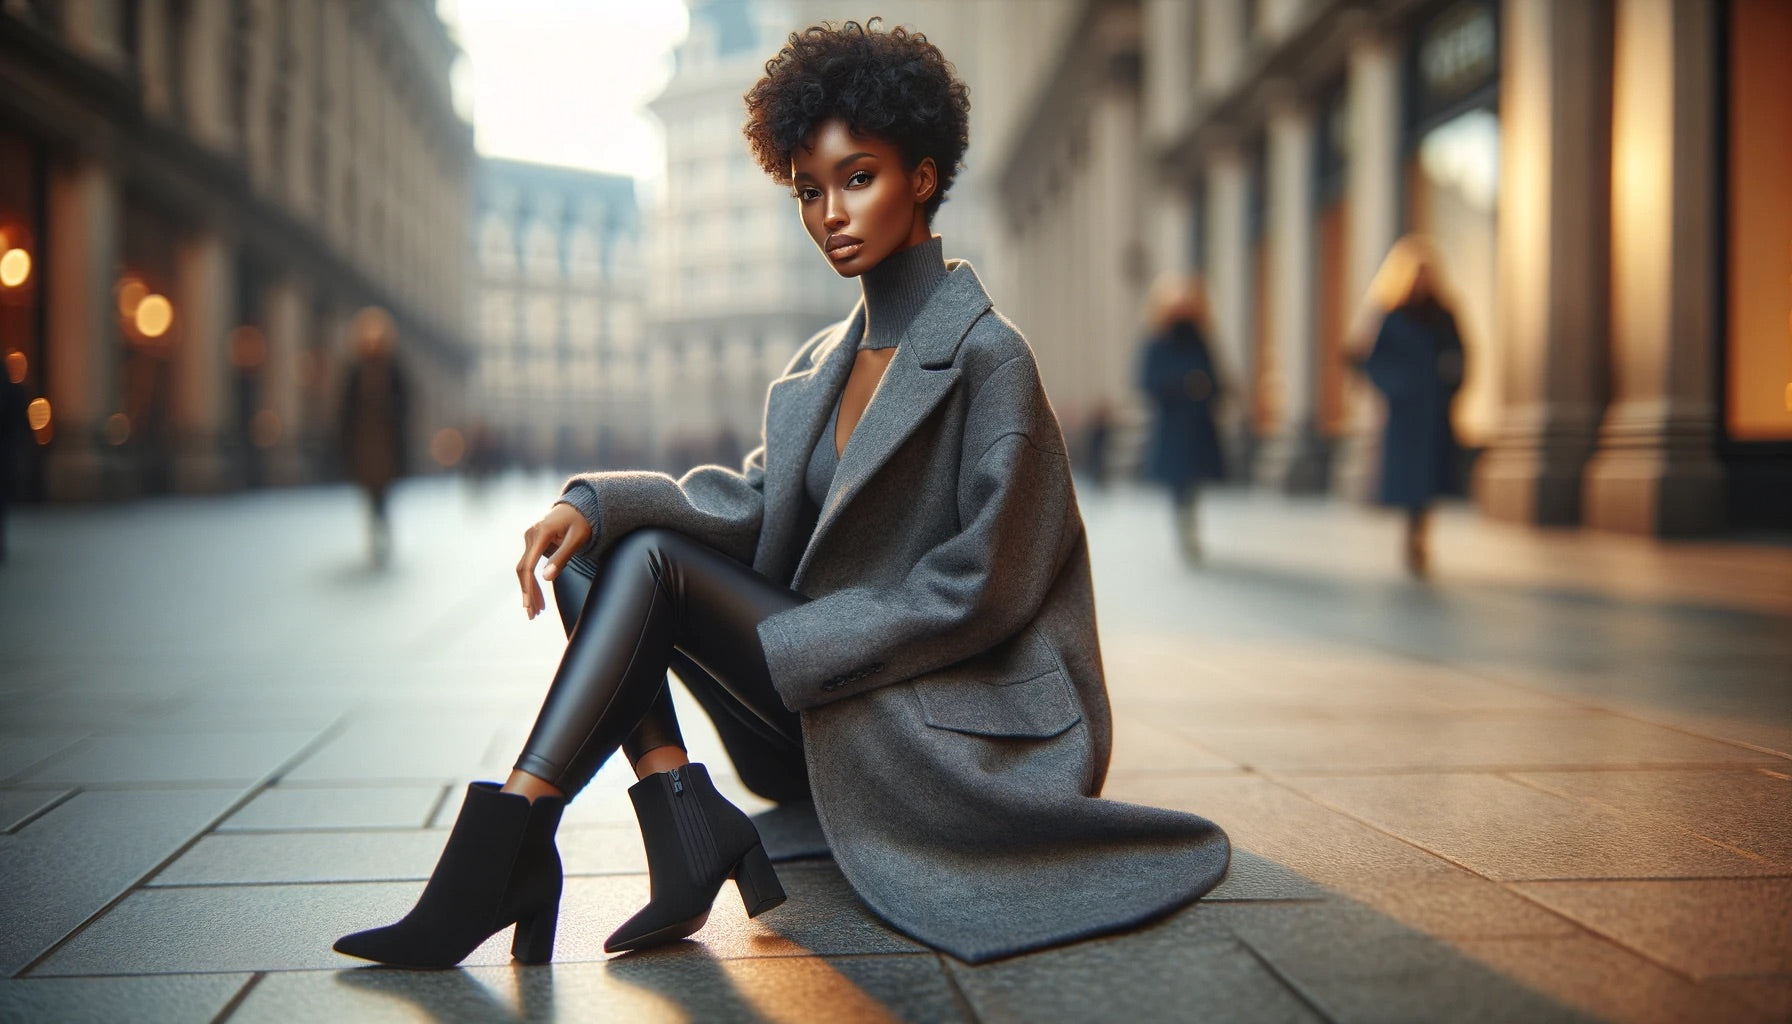 The Chic Athleisure Way: Styling Your Grey Coat with Leggings and Boots